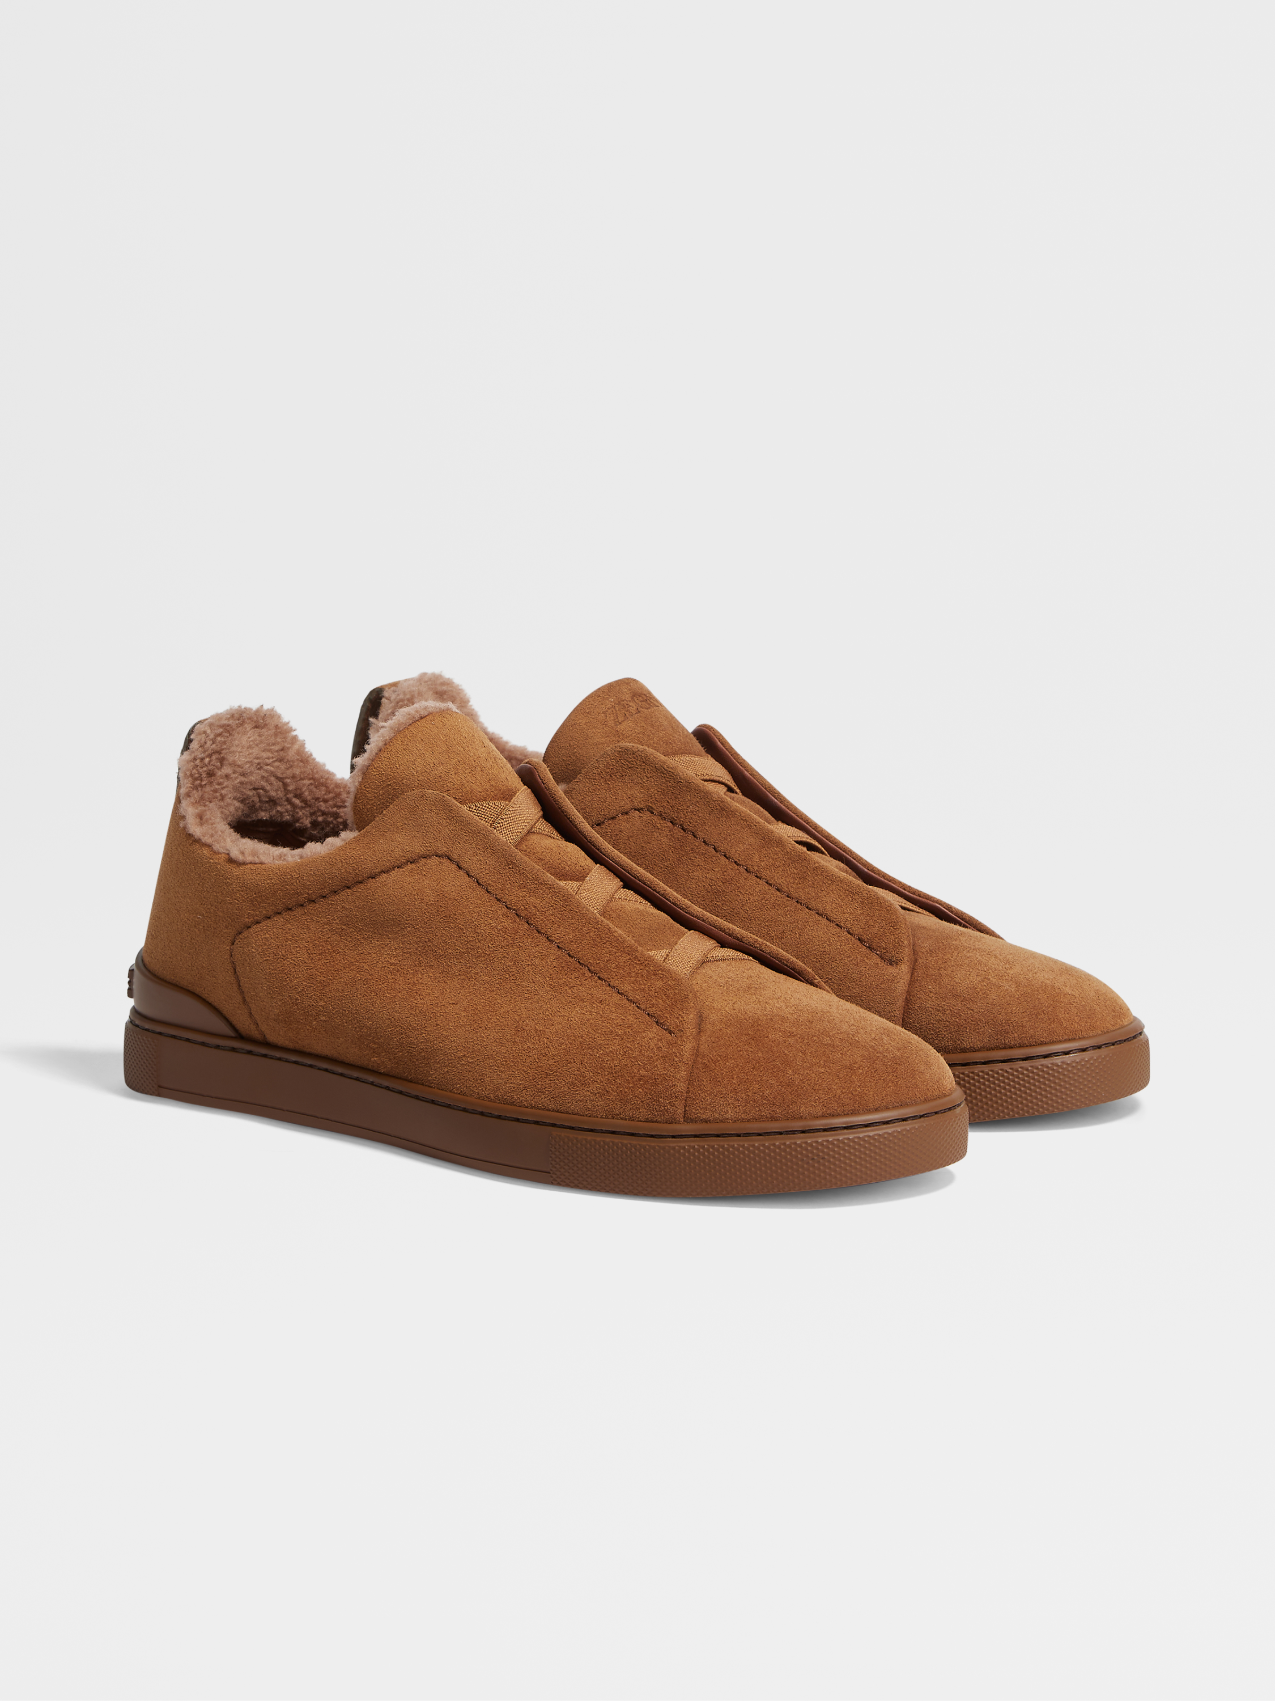 Light Brown Suede Triple Stitch™ Sneakers